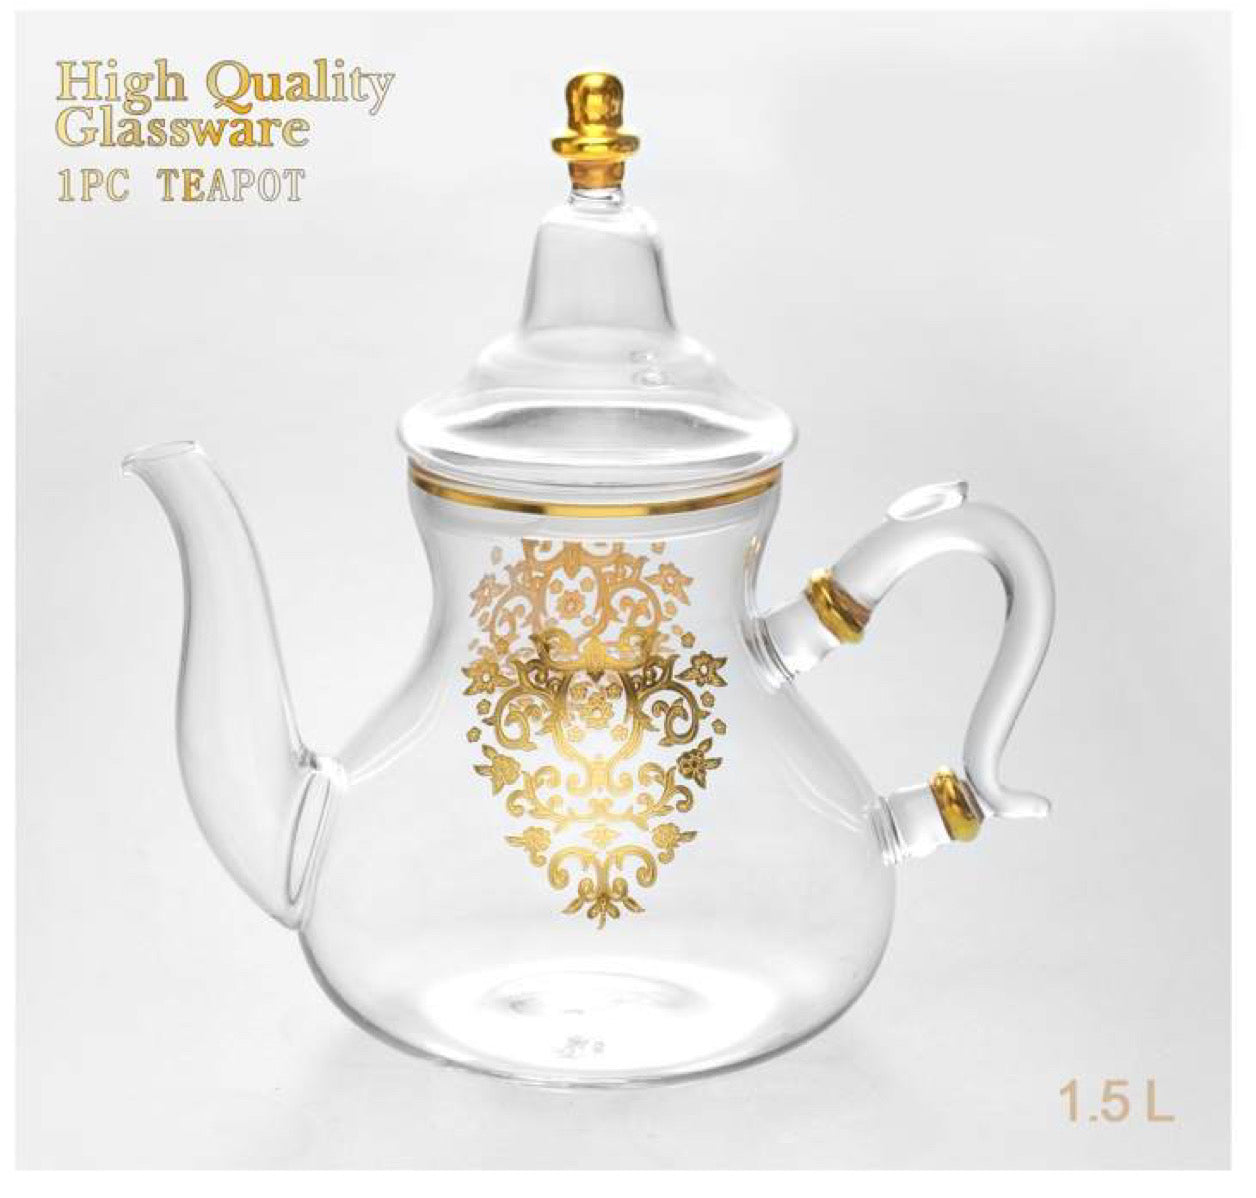 Imported Glass Moroccan Teapot with Integrated Filter, Bring Home a Beautifully Functional Near East Tradition, 47 Ounces. (1.50 L) - Marrakesh Gardens